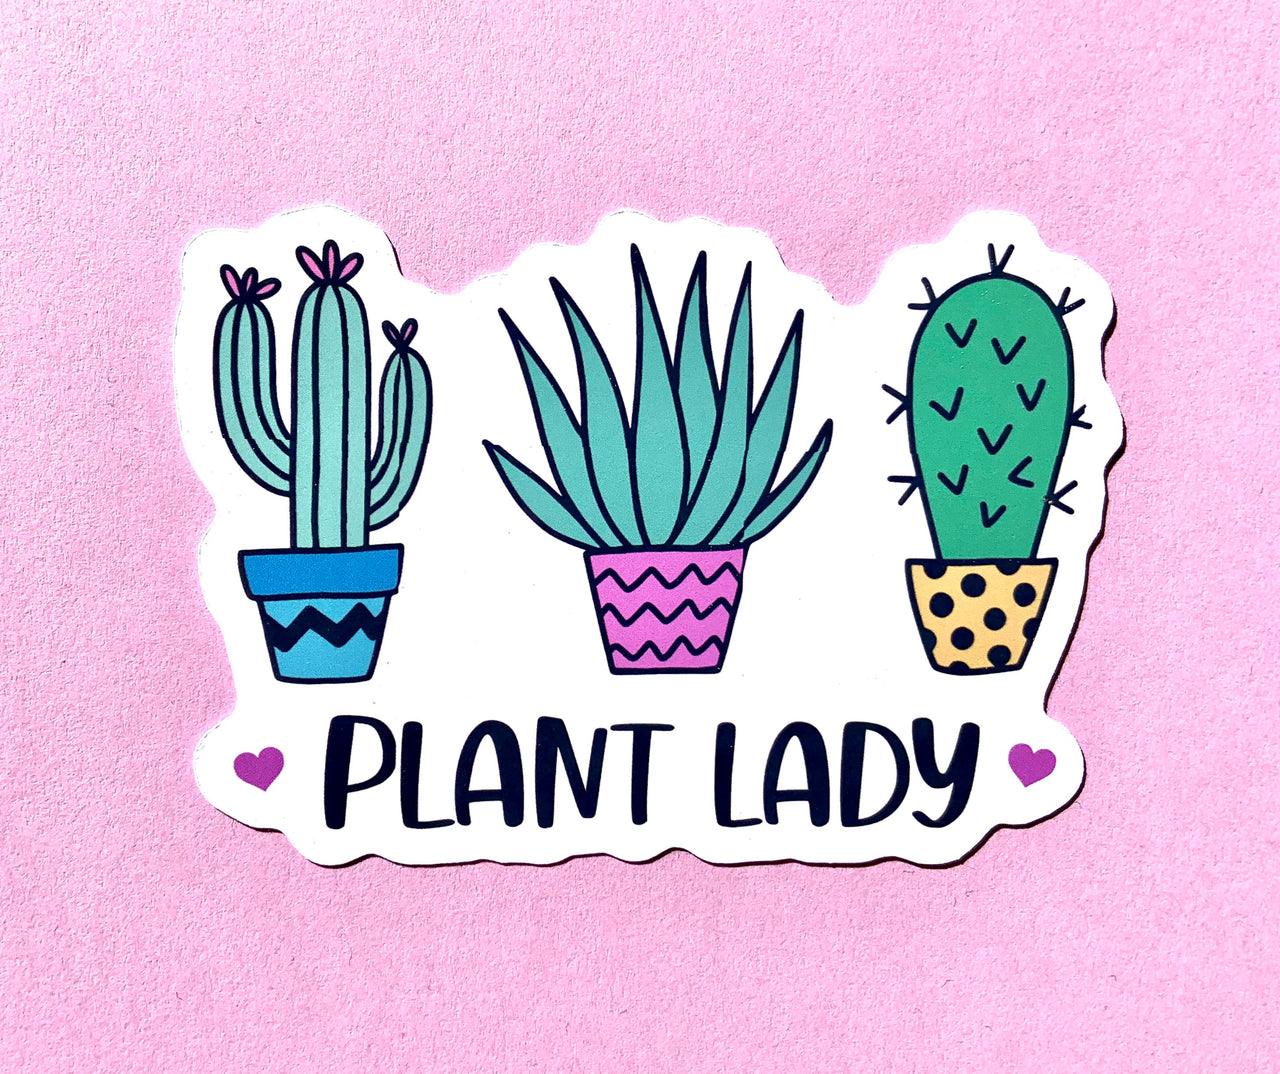 Plant lady stickers (pack of 3 or 5)